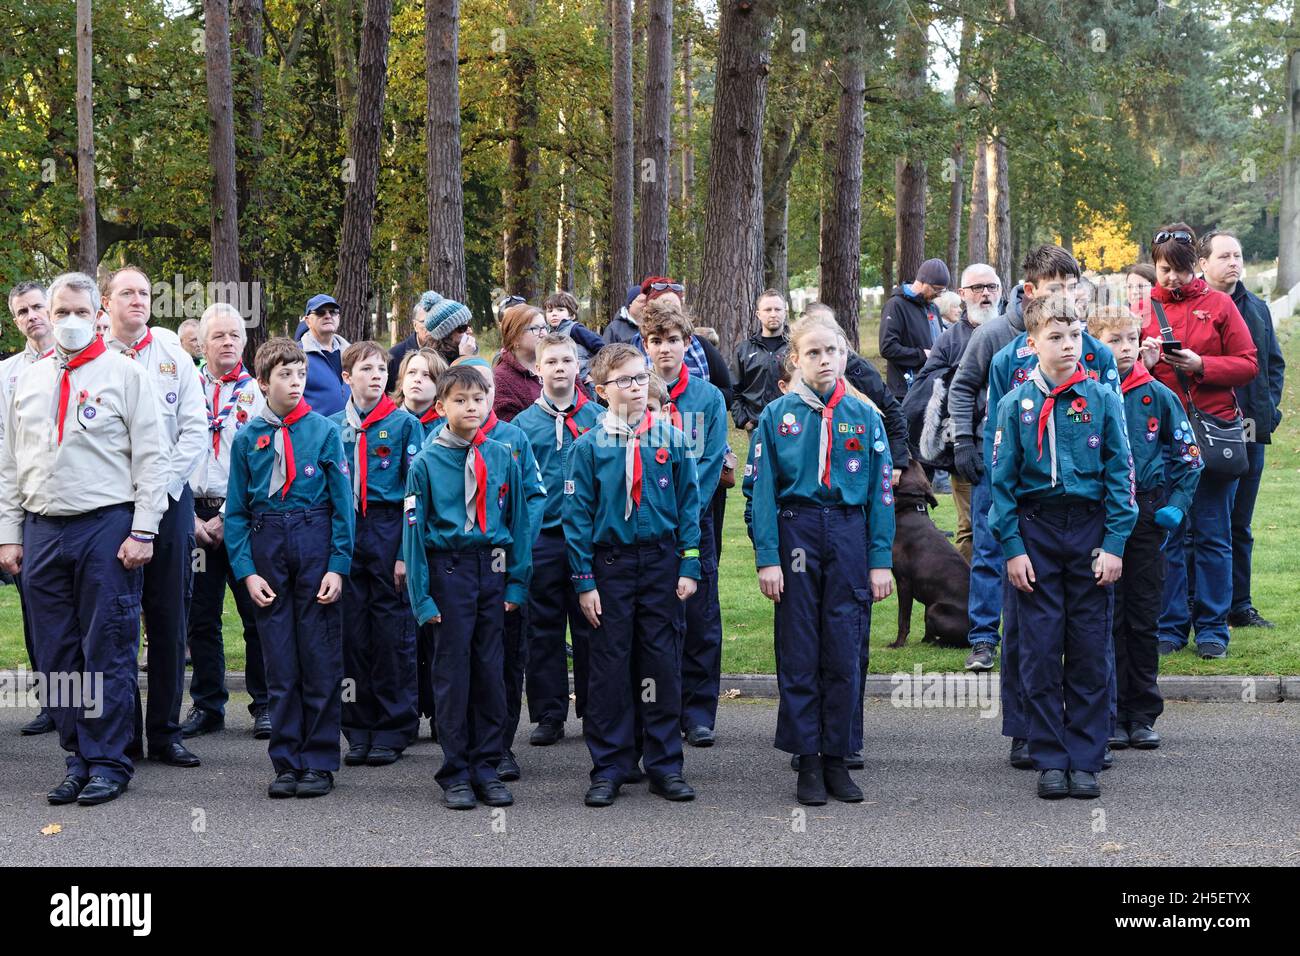 Sunday 7th November 2021. Scouts and guides form up for the remembrance service. Brookwood Last Post Association hold their monthly service with hundreds of scouts, guides & the 1st Claygate Scout & Guide Band. Air Forces Shelter, Brookwood Military Cemetery, Surrey. Stock Photo